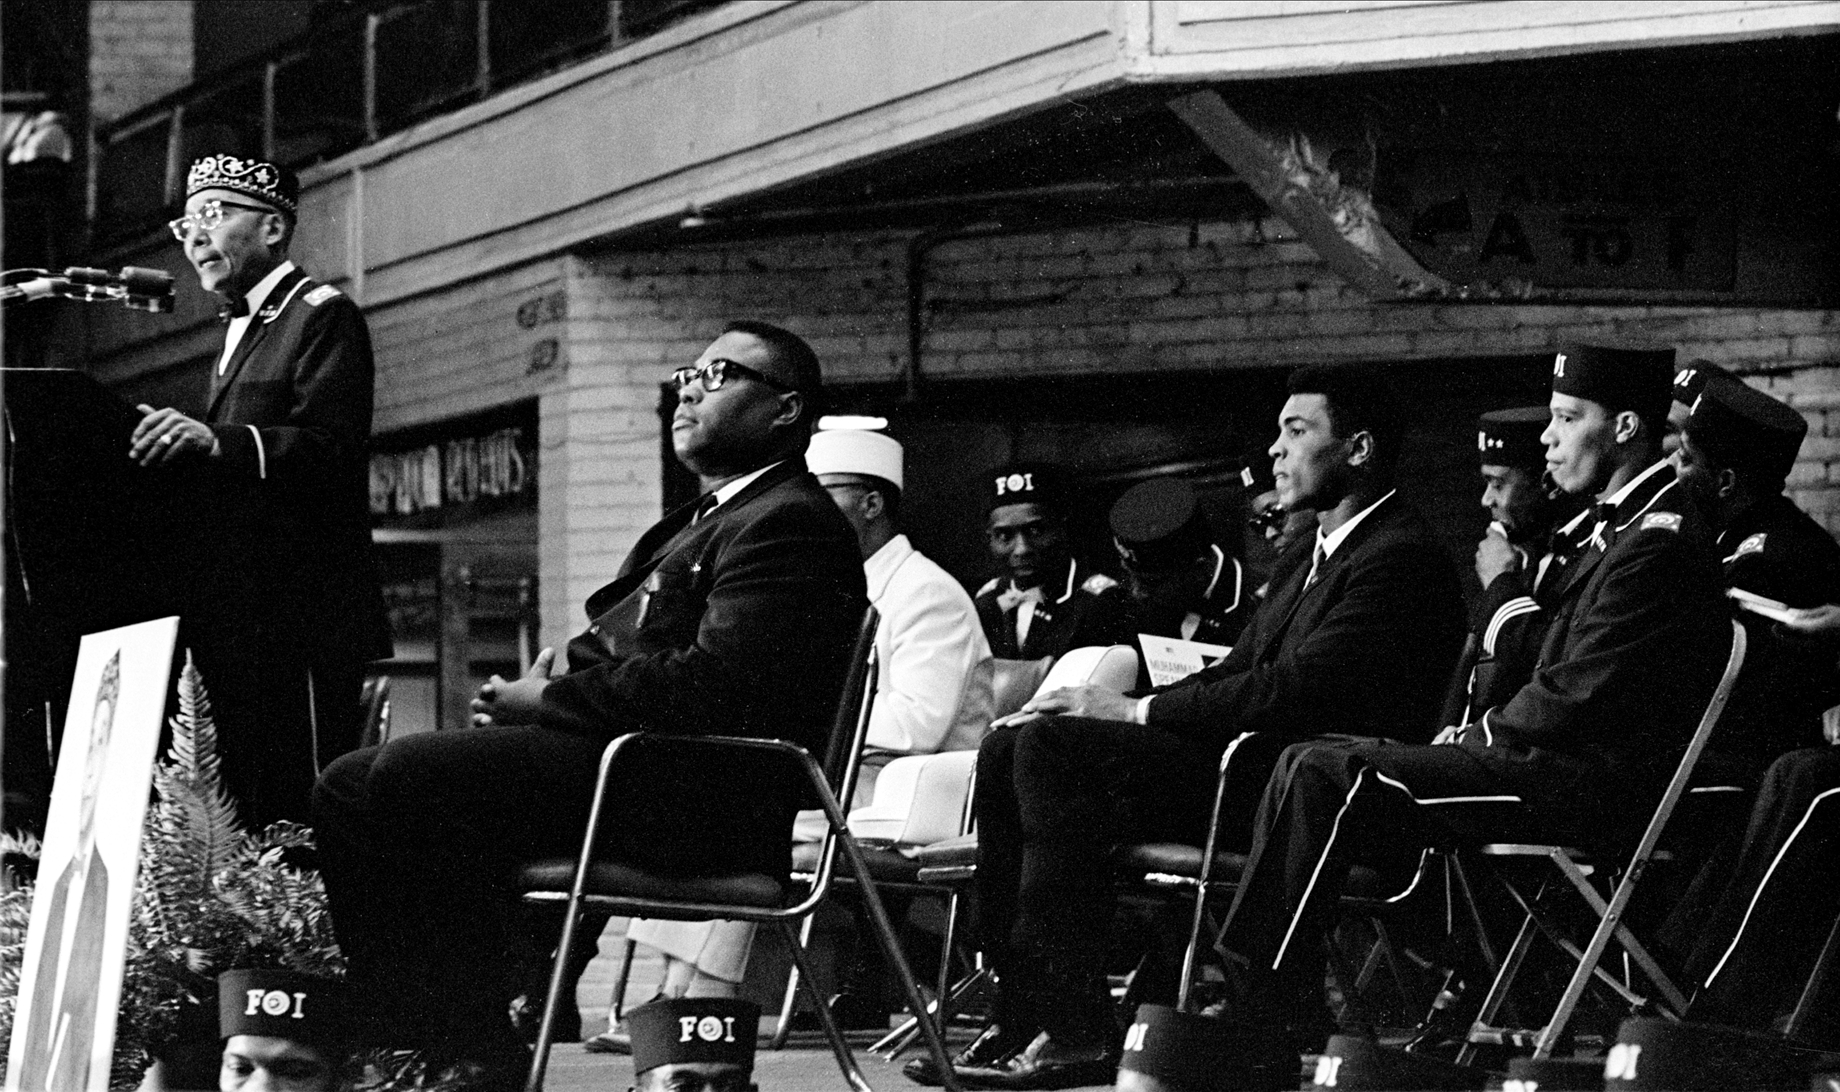 Elijah Muhammad speaks during Saviour's Day celebrations, while Muhammad Ali listens (center, fore), at the International Ampitheatre, Chicago, IL, on Feb. 27, 1966. (Robert Abbott Sengstacke—Getty Images)